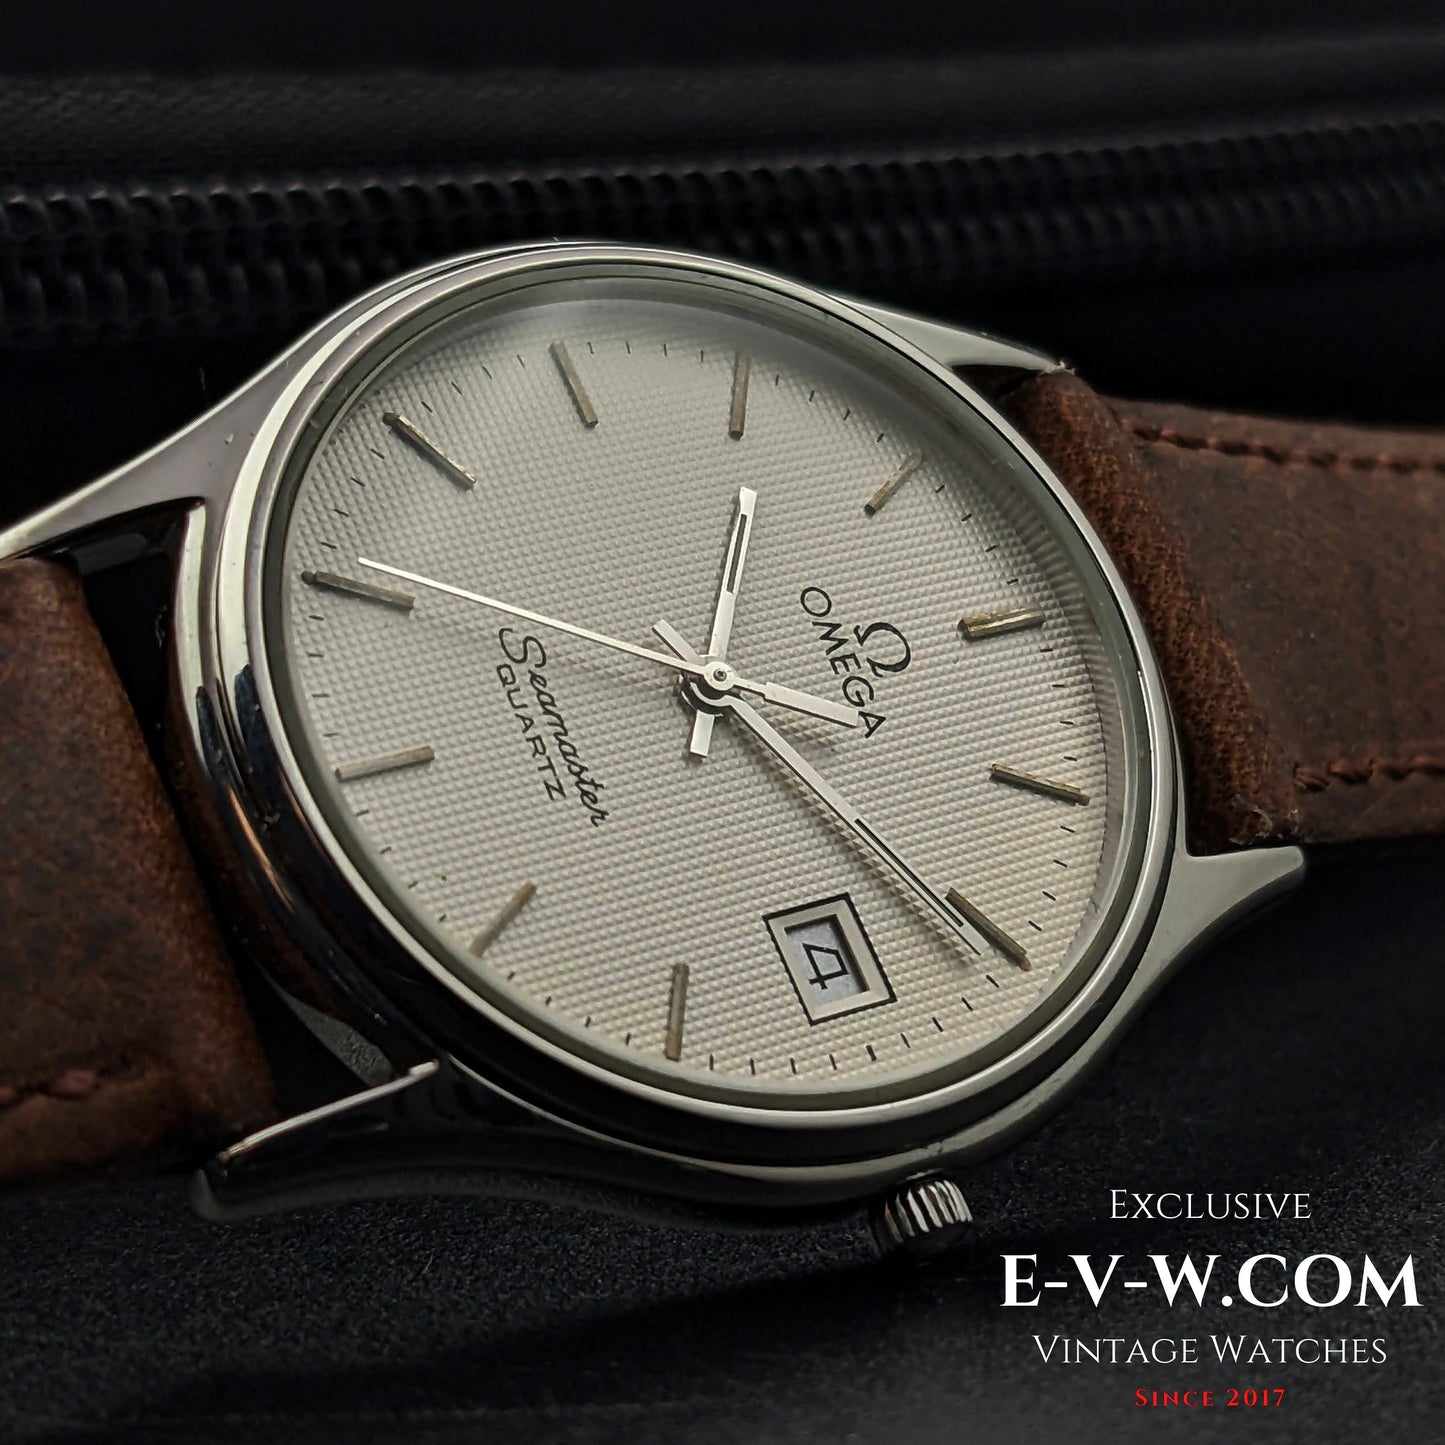 41 Years Old Vintage Omega Seamaster / Guilloche Dial / Cal. 1430 / Vintage 1982